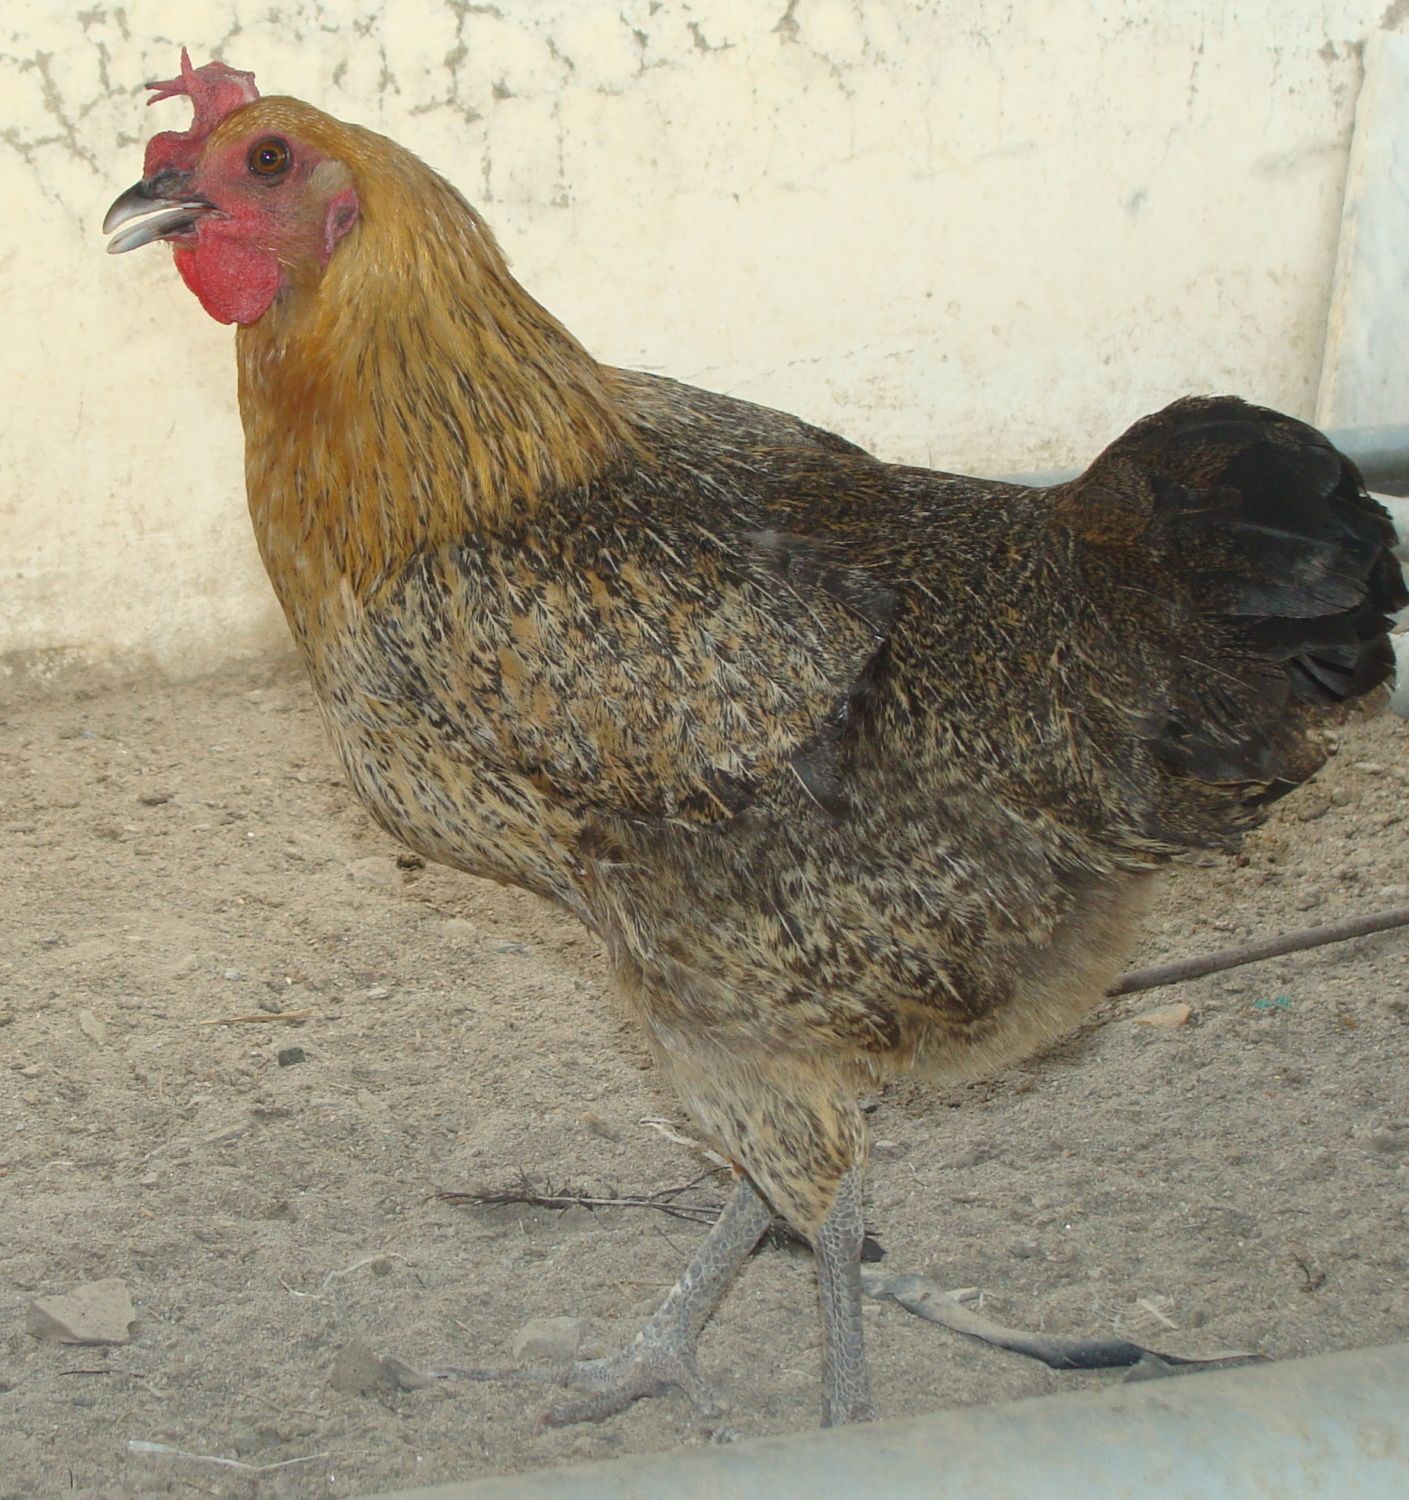 Want to Know my chicken breeds